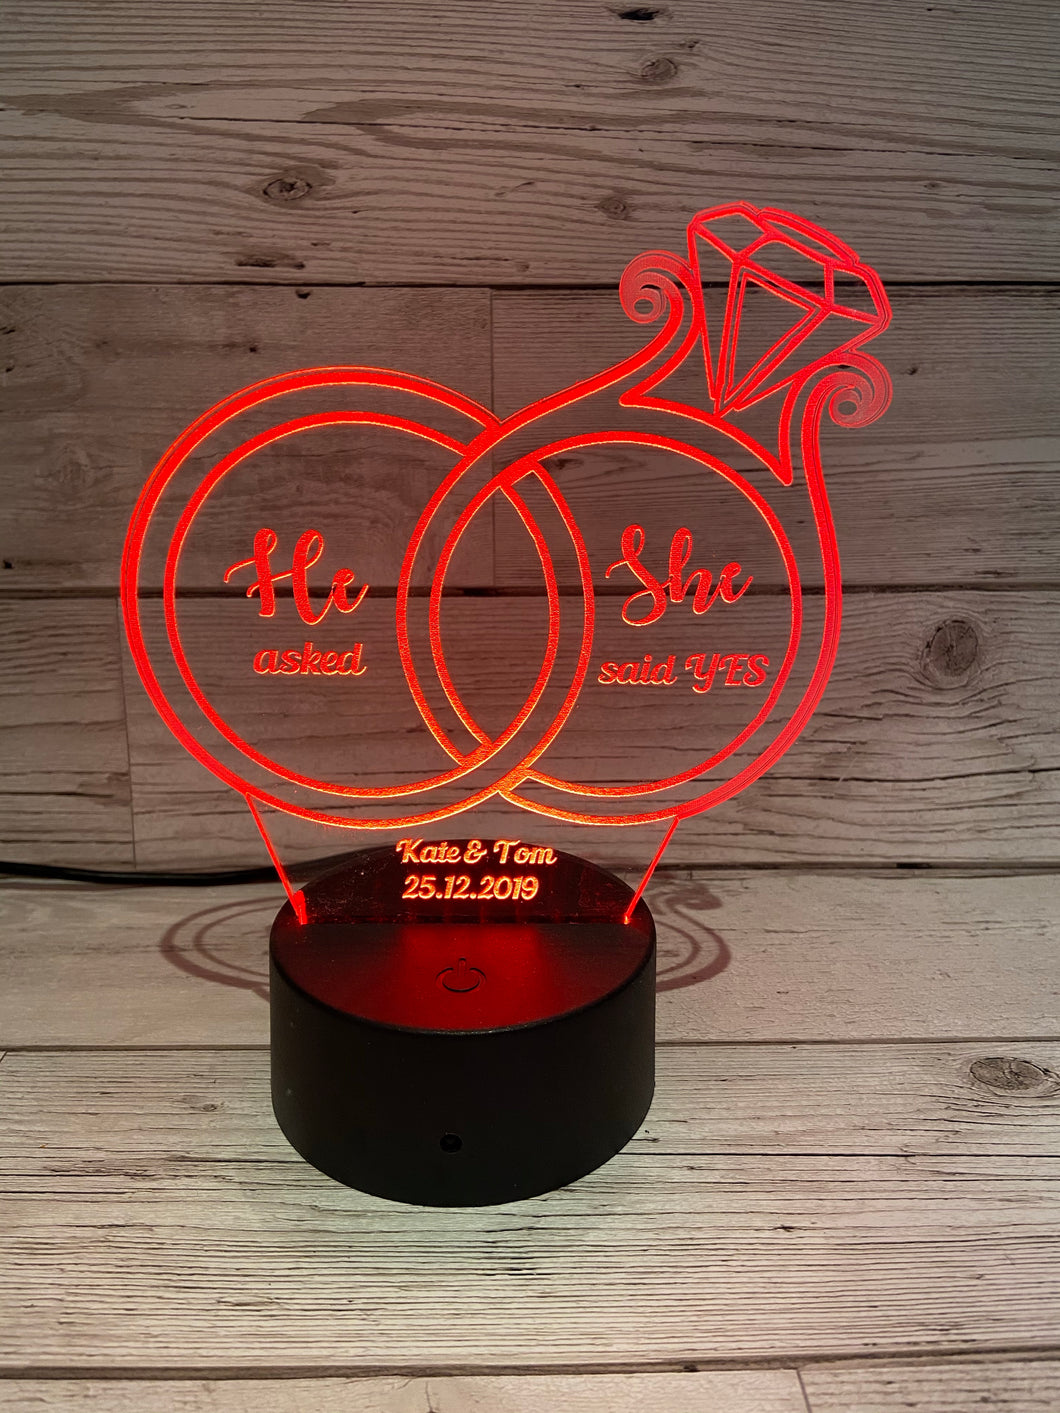 Led light up 3D Ring engagement display. 9 Colour options with remote! - Laser LLama Designs Ltd